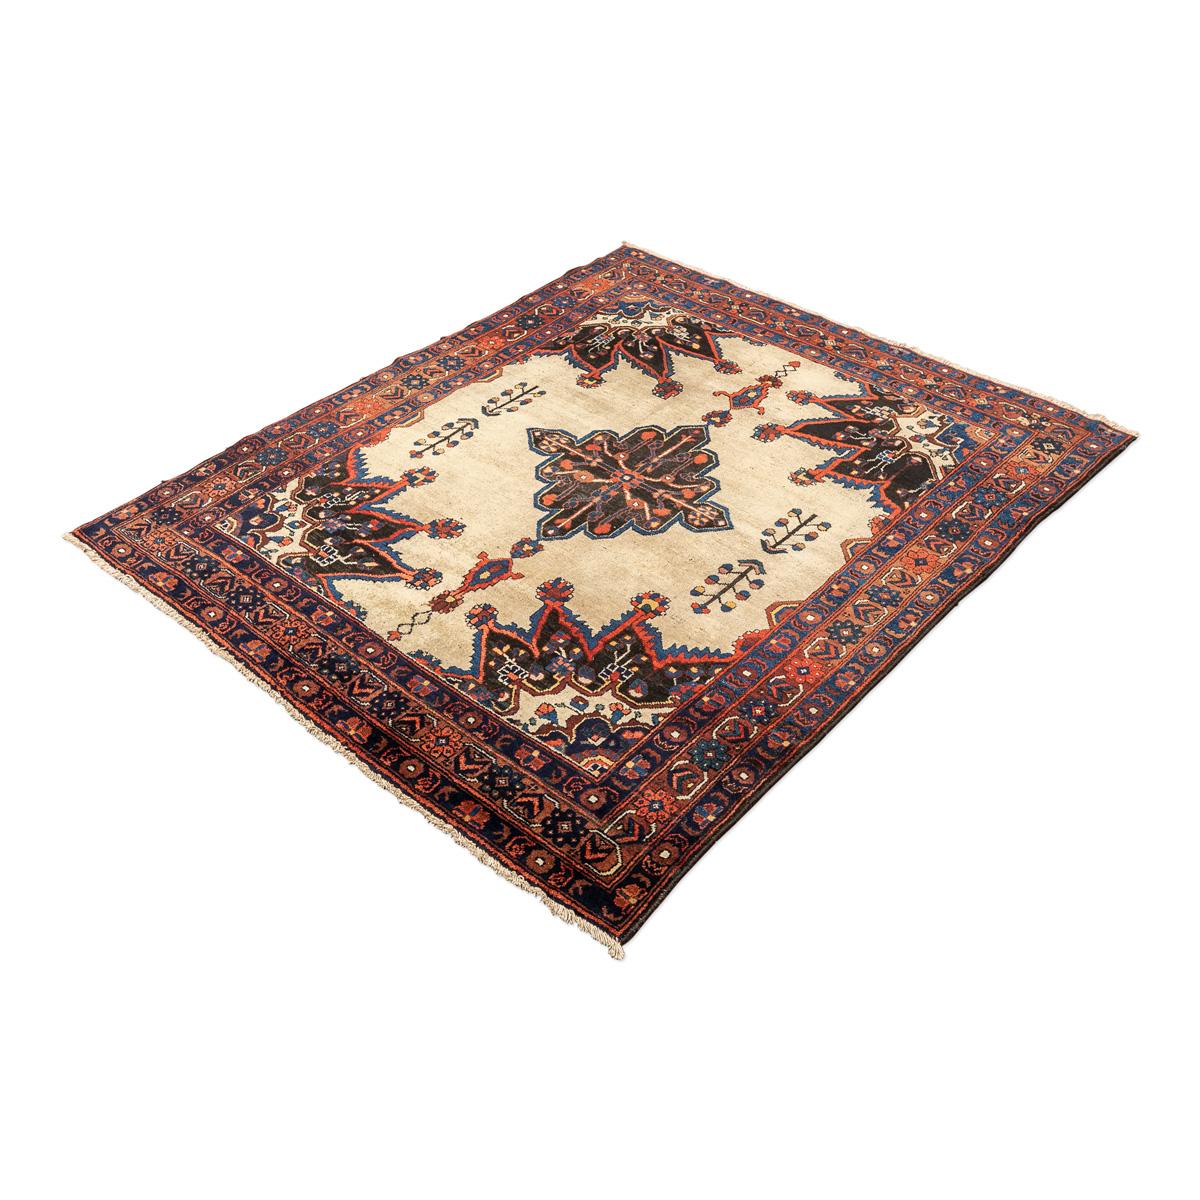 Antique Classic rug, circa 1900. Measures: 1.40 x 1.65 m.
- Handmade wool rug.
- Of ethnic origin, this type of rugs were not made for later sale but for private use, hence the decorative richness of this type of pieces.
- The flexibility of the rug